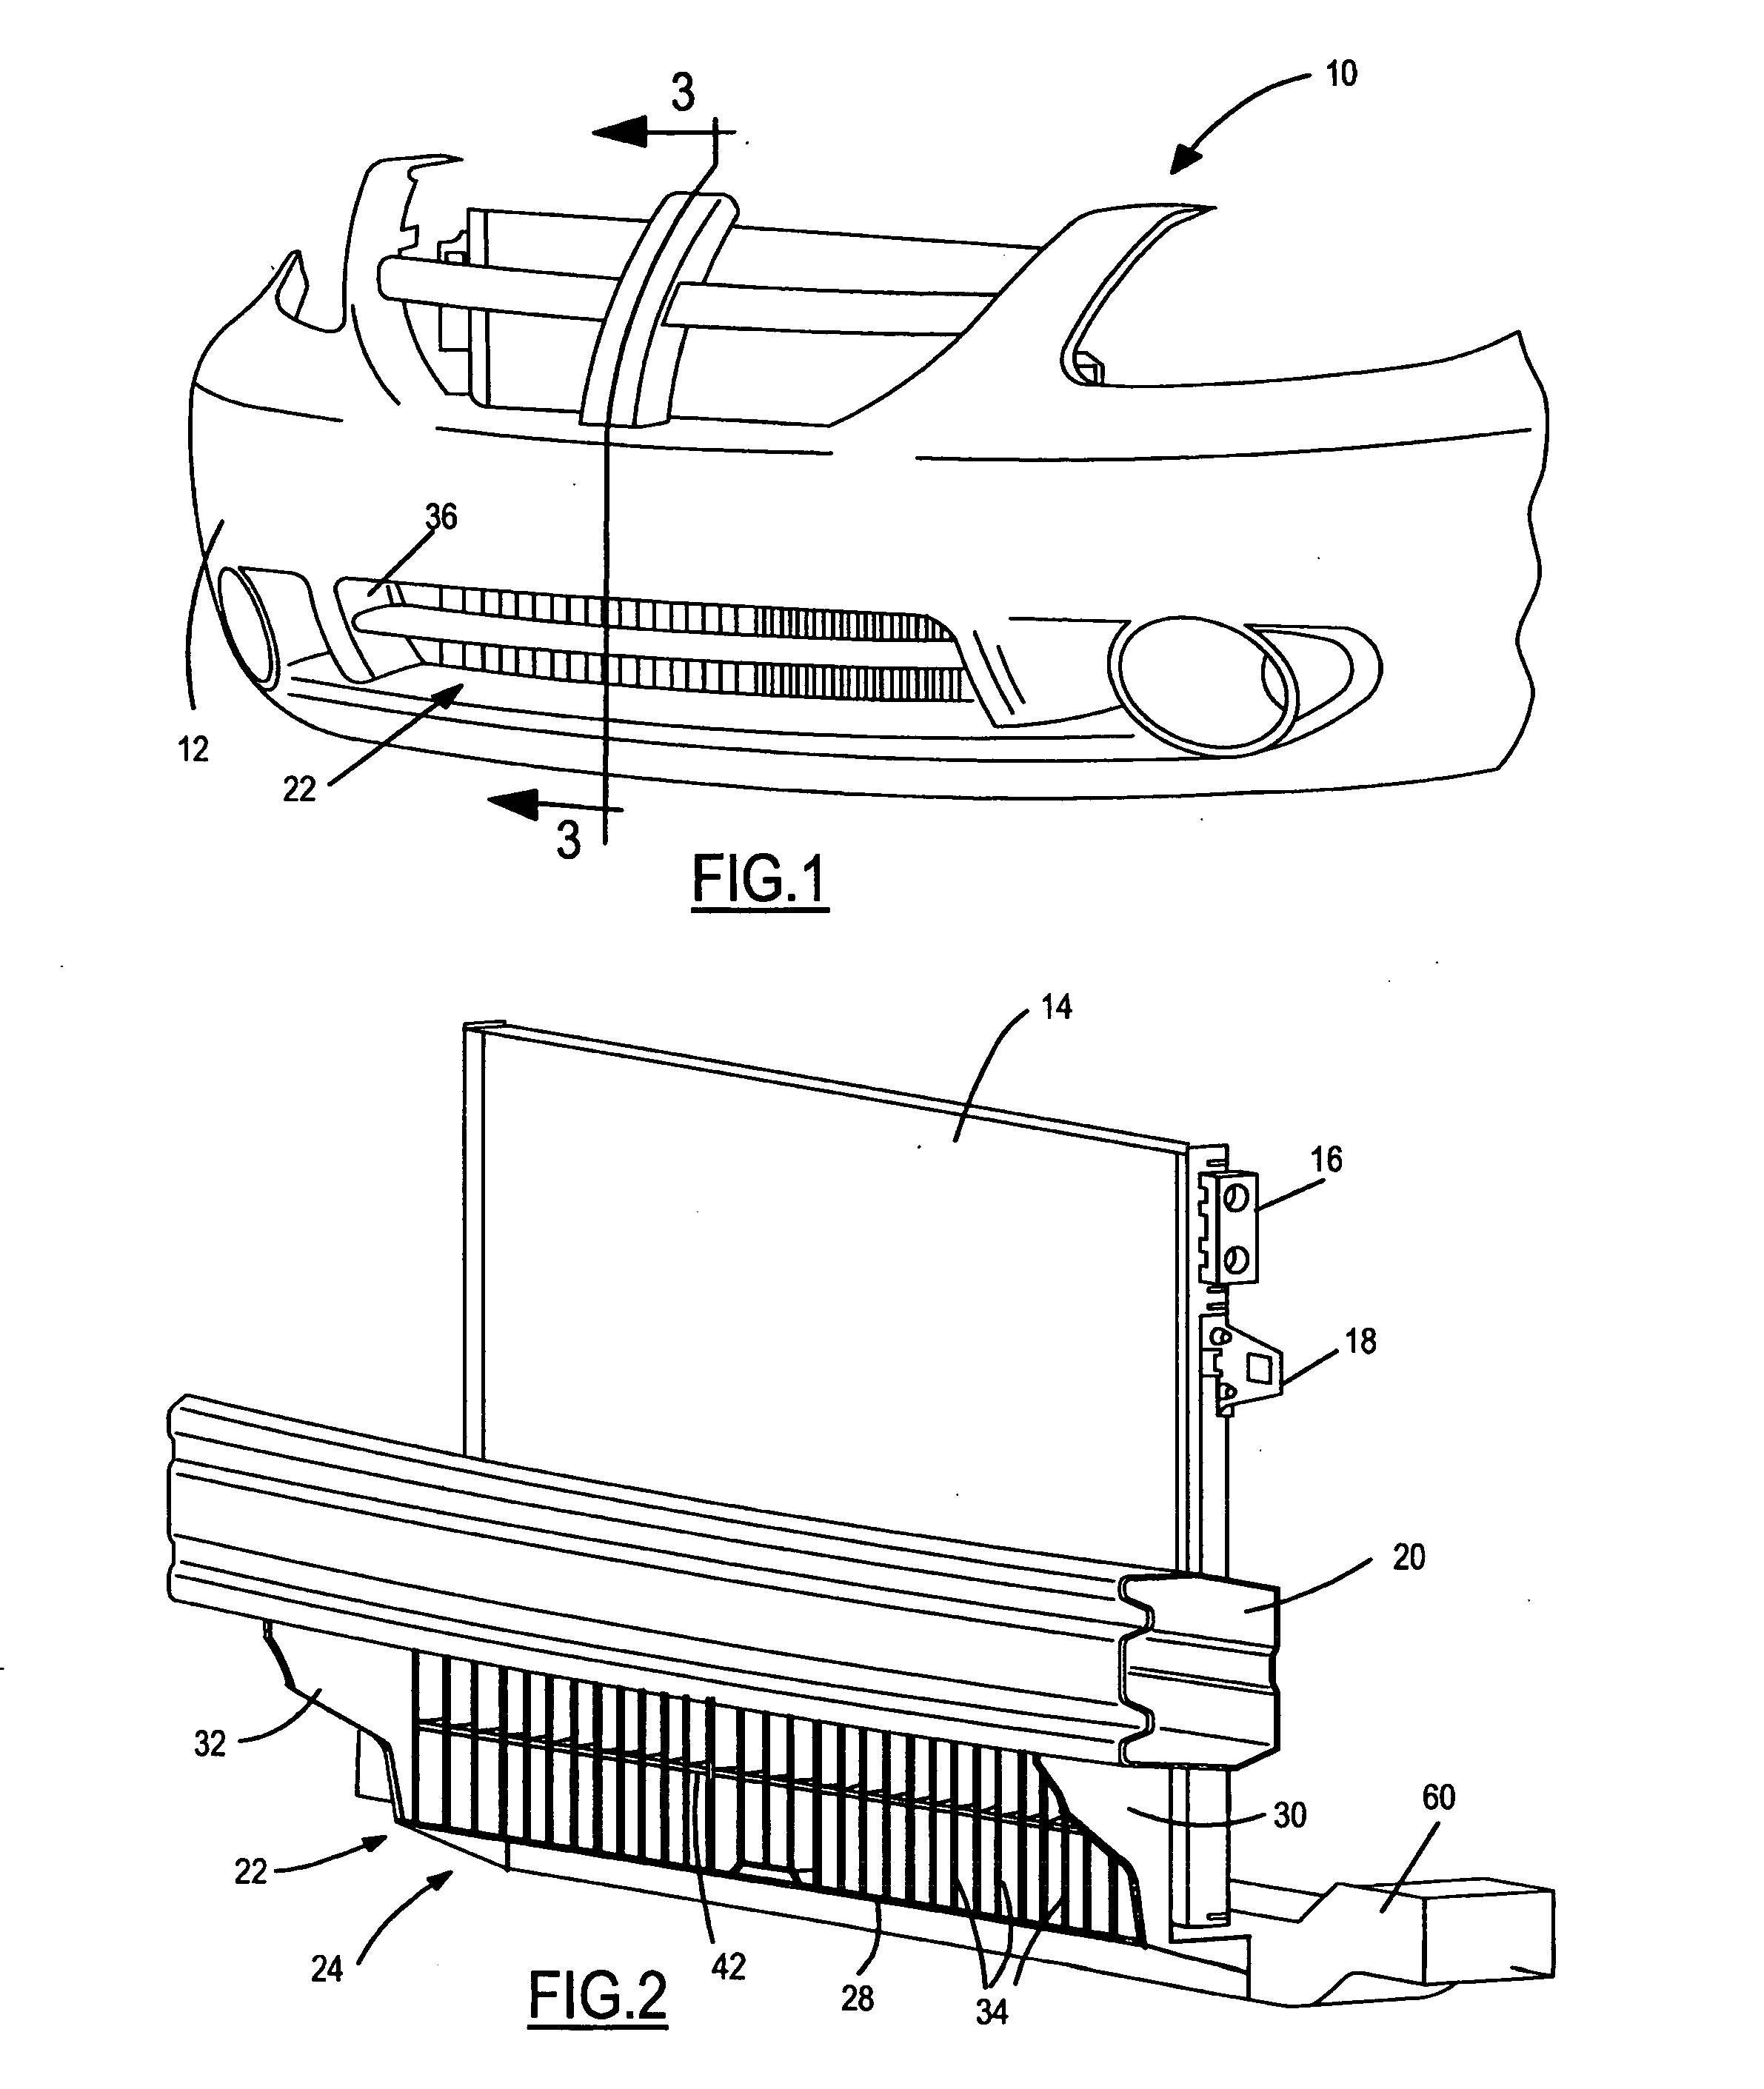 A/C condenser damage protection device